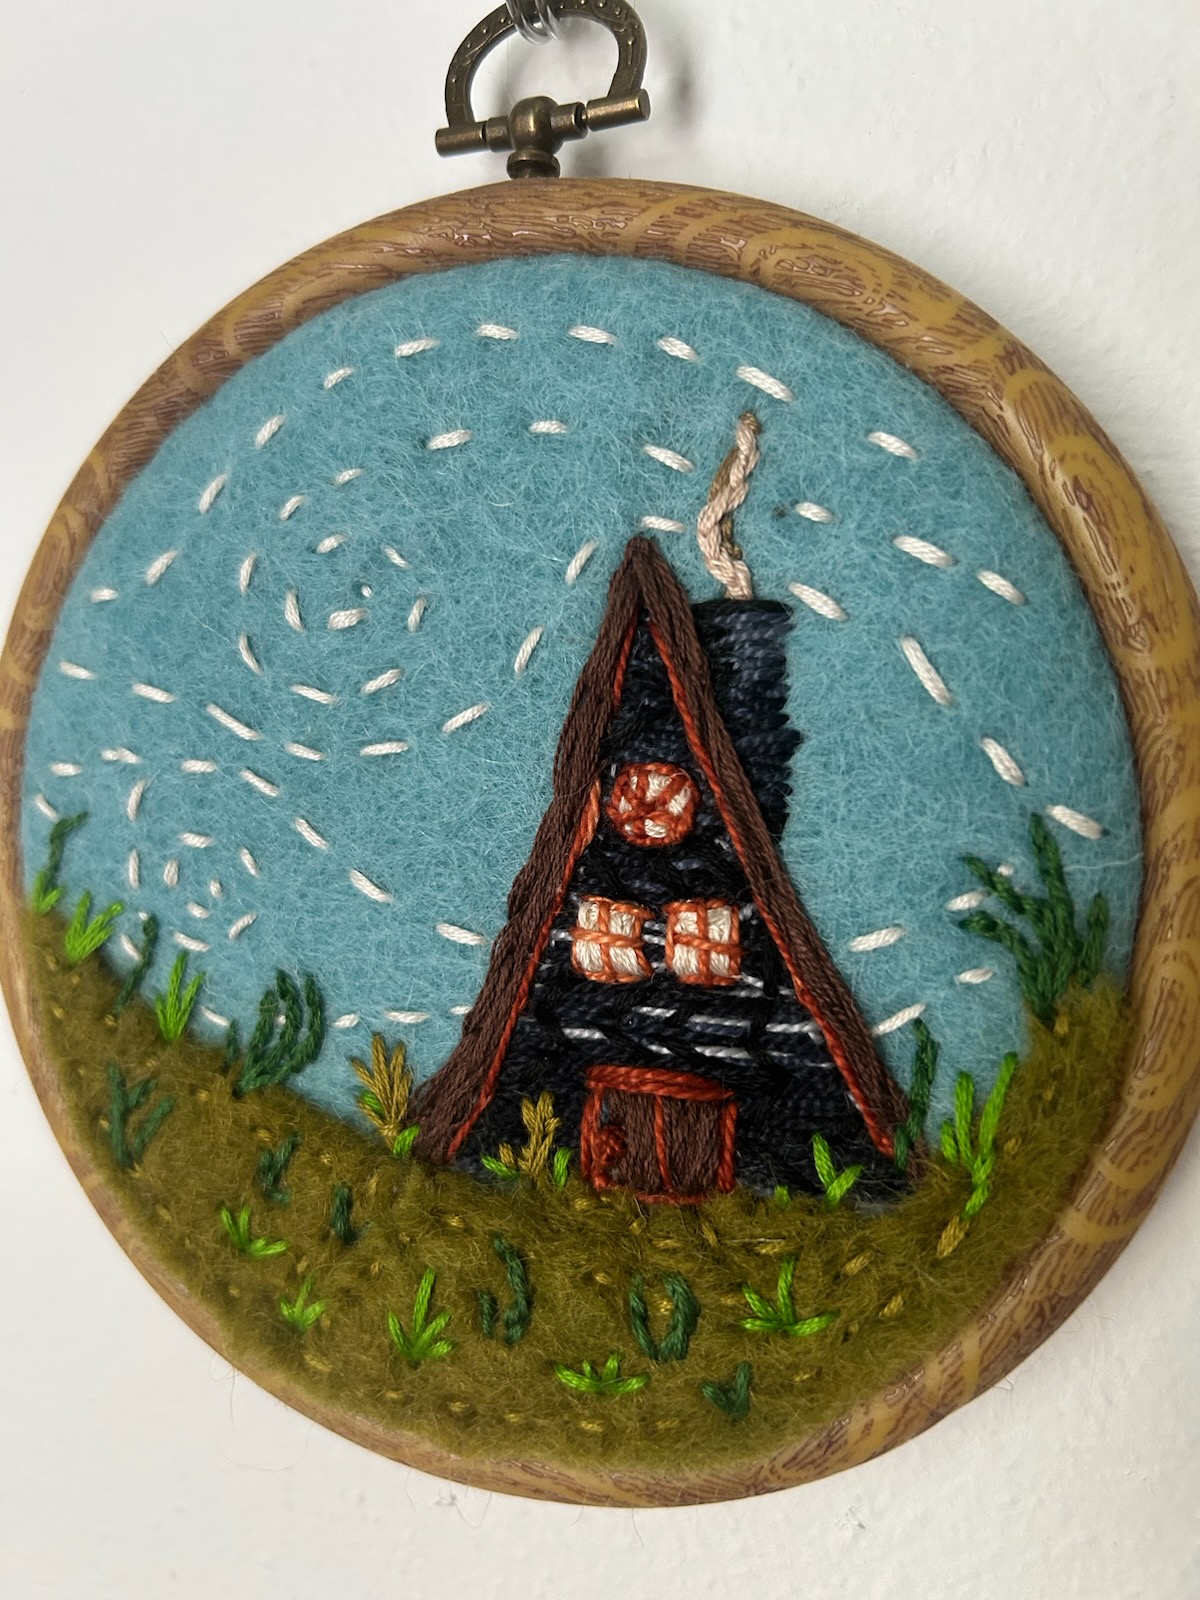 embroidered hoop of a-frame cabin with smoke coming out of chimney against a blue sky with green foliage in front